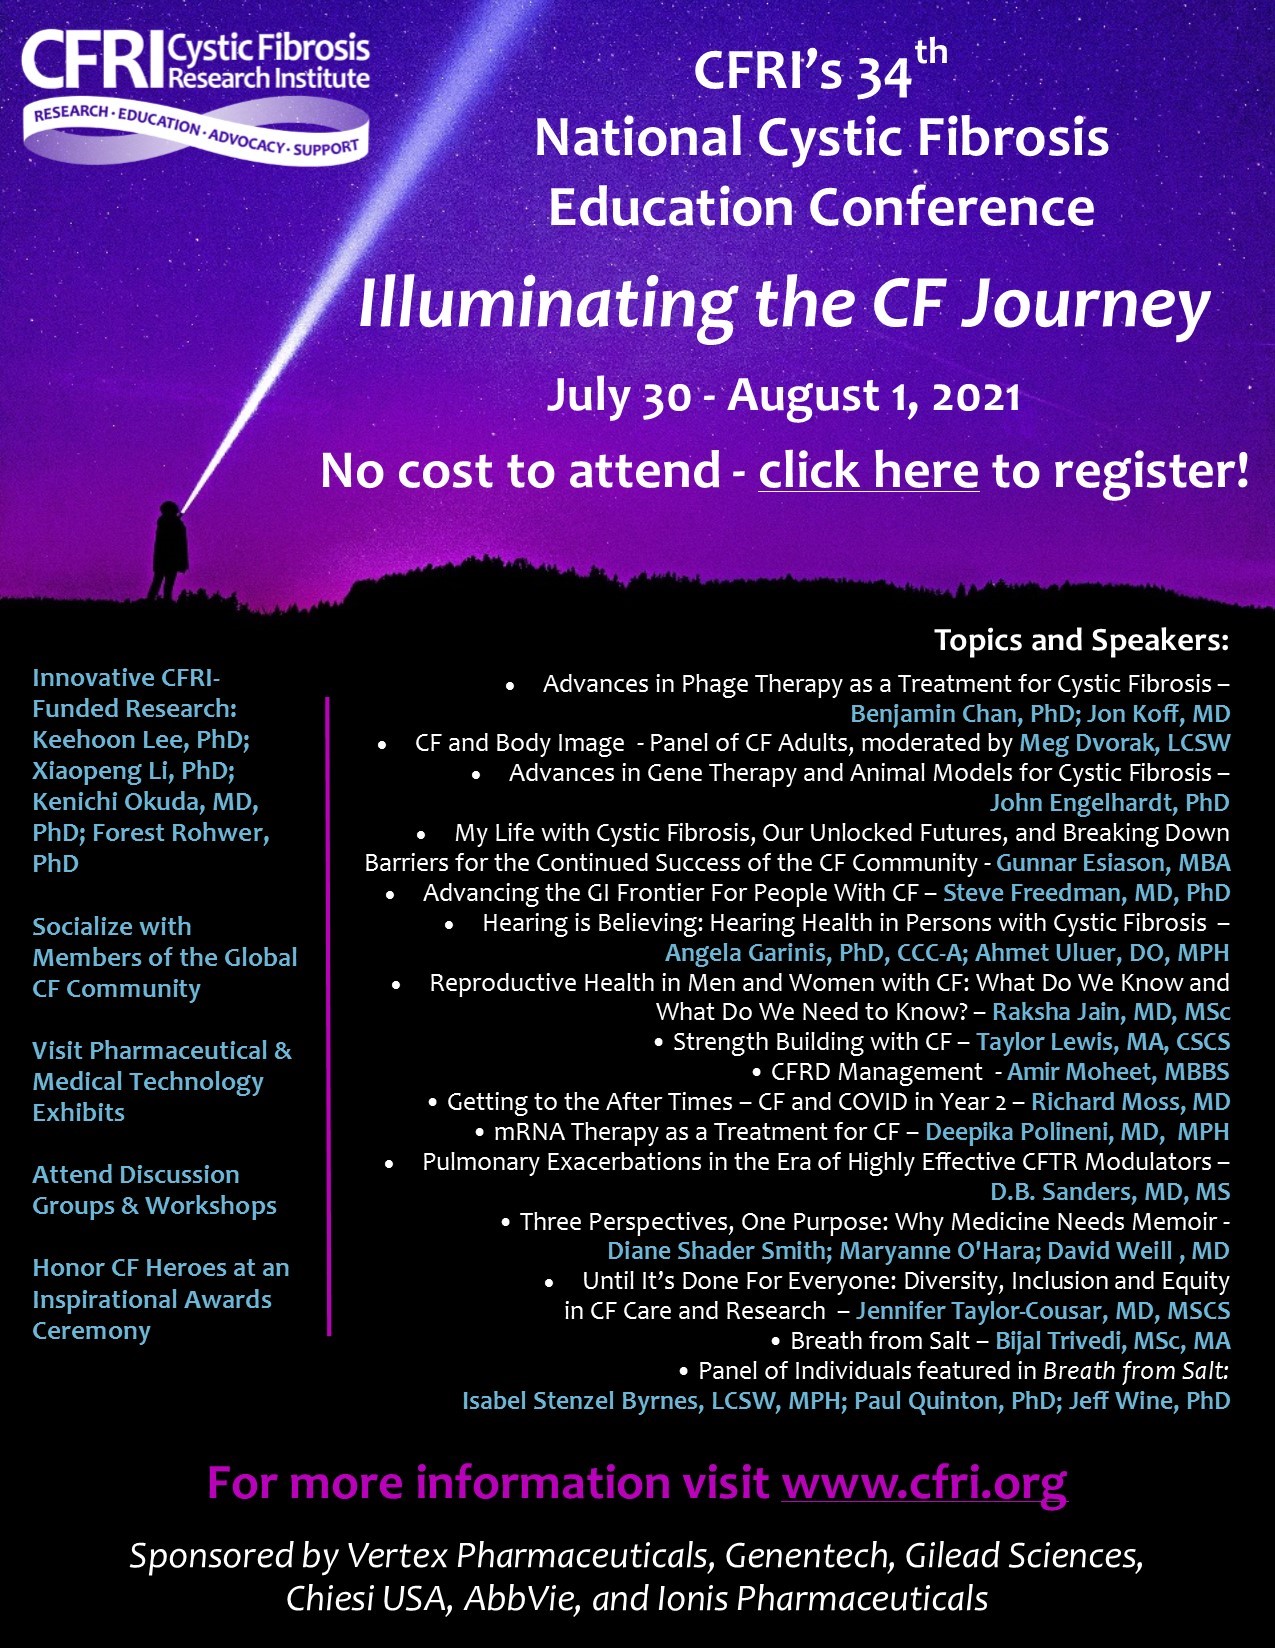 CRFI 34th National Cystic Fibrosis Education Conference